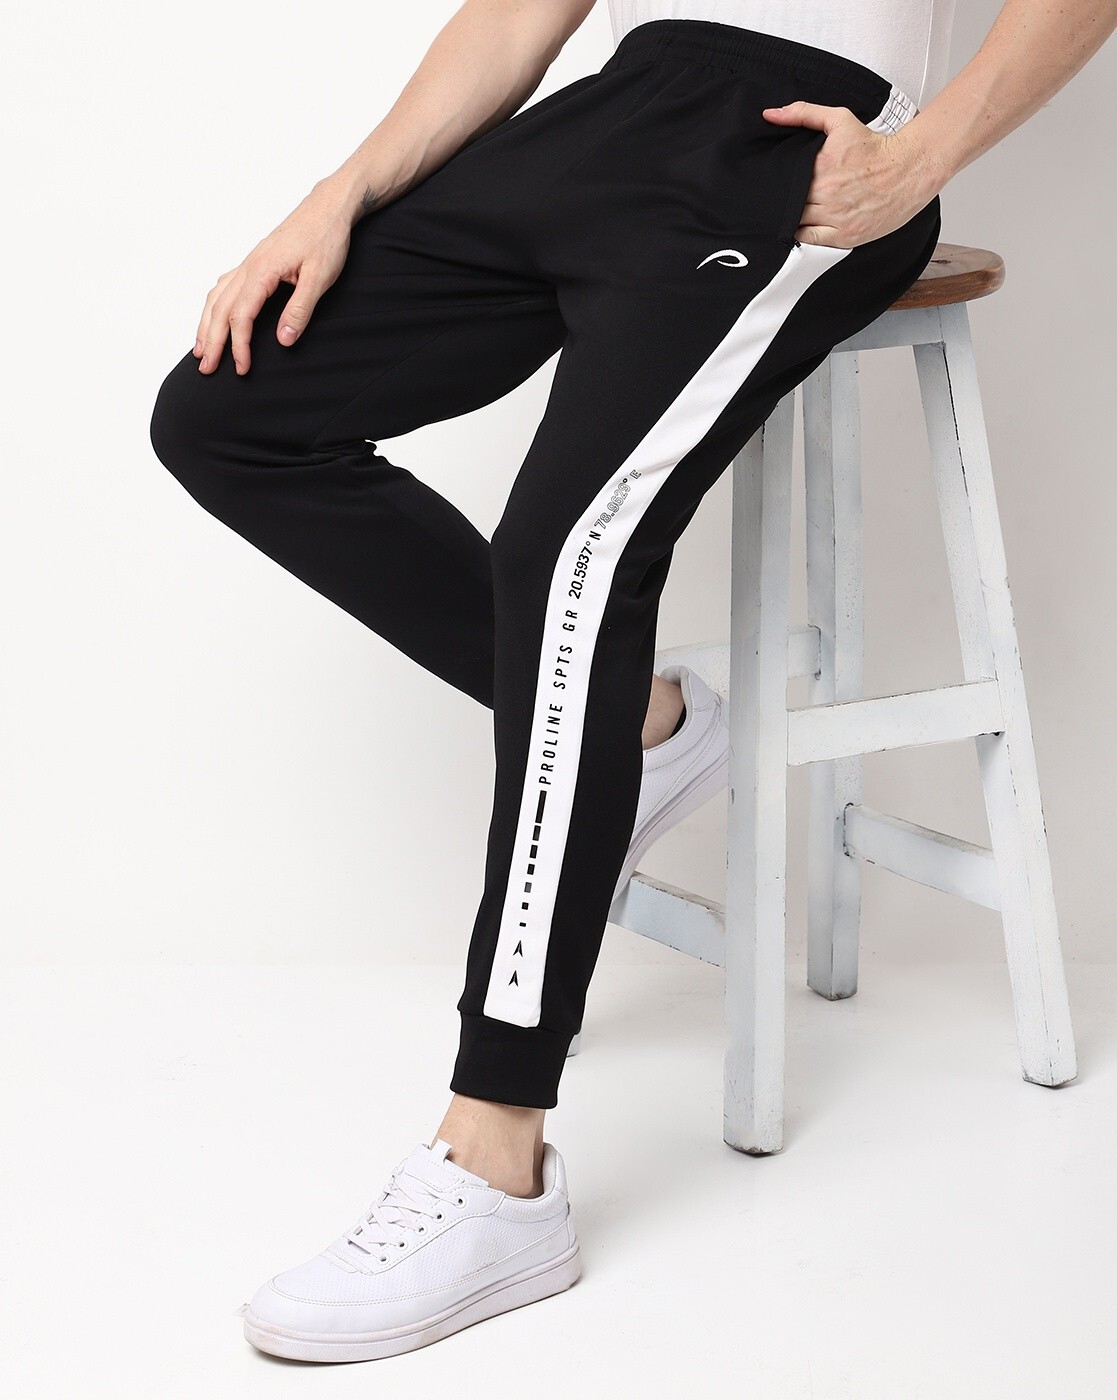 Proline Track Pant in Haldwani - Dealers, Manufacturers & Suppliers -  Justdial